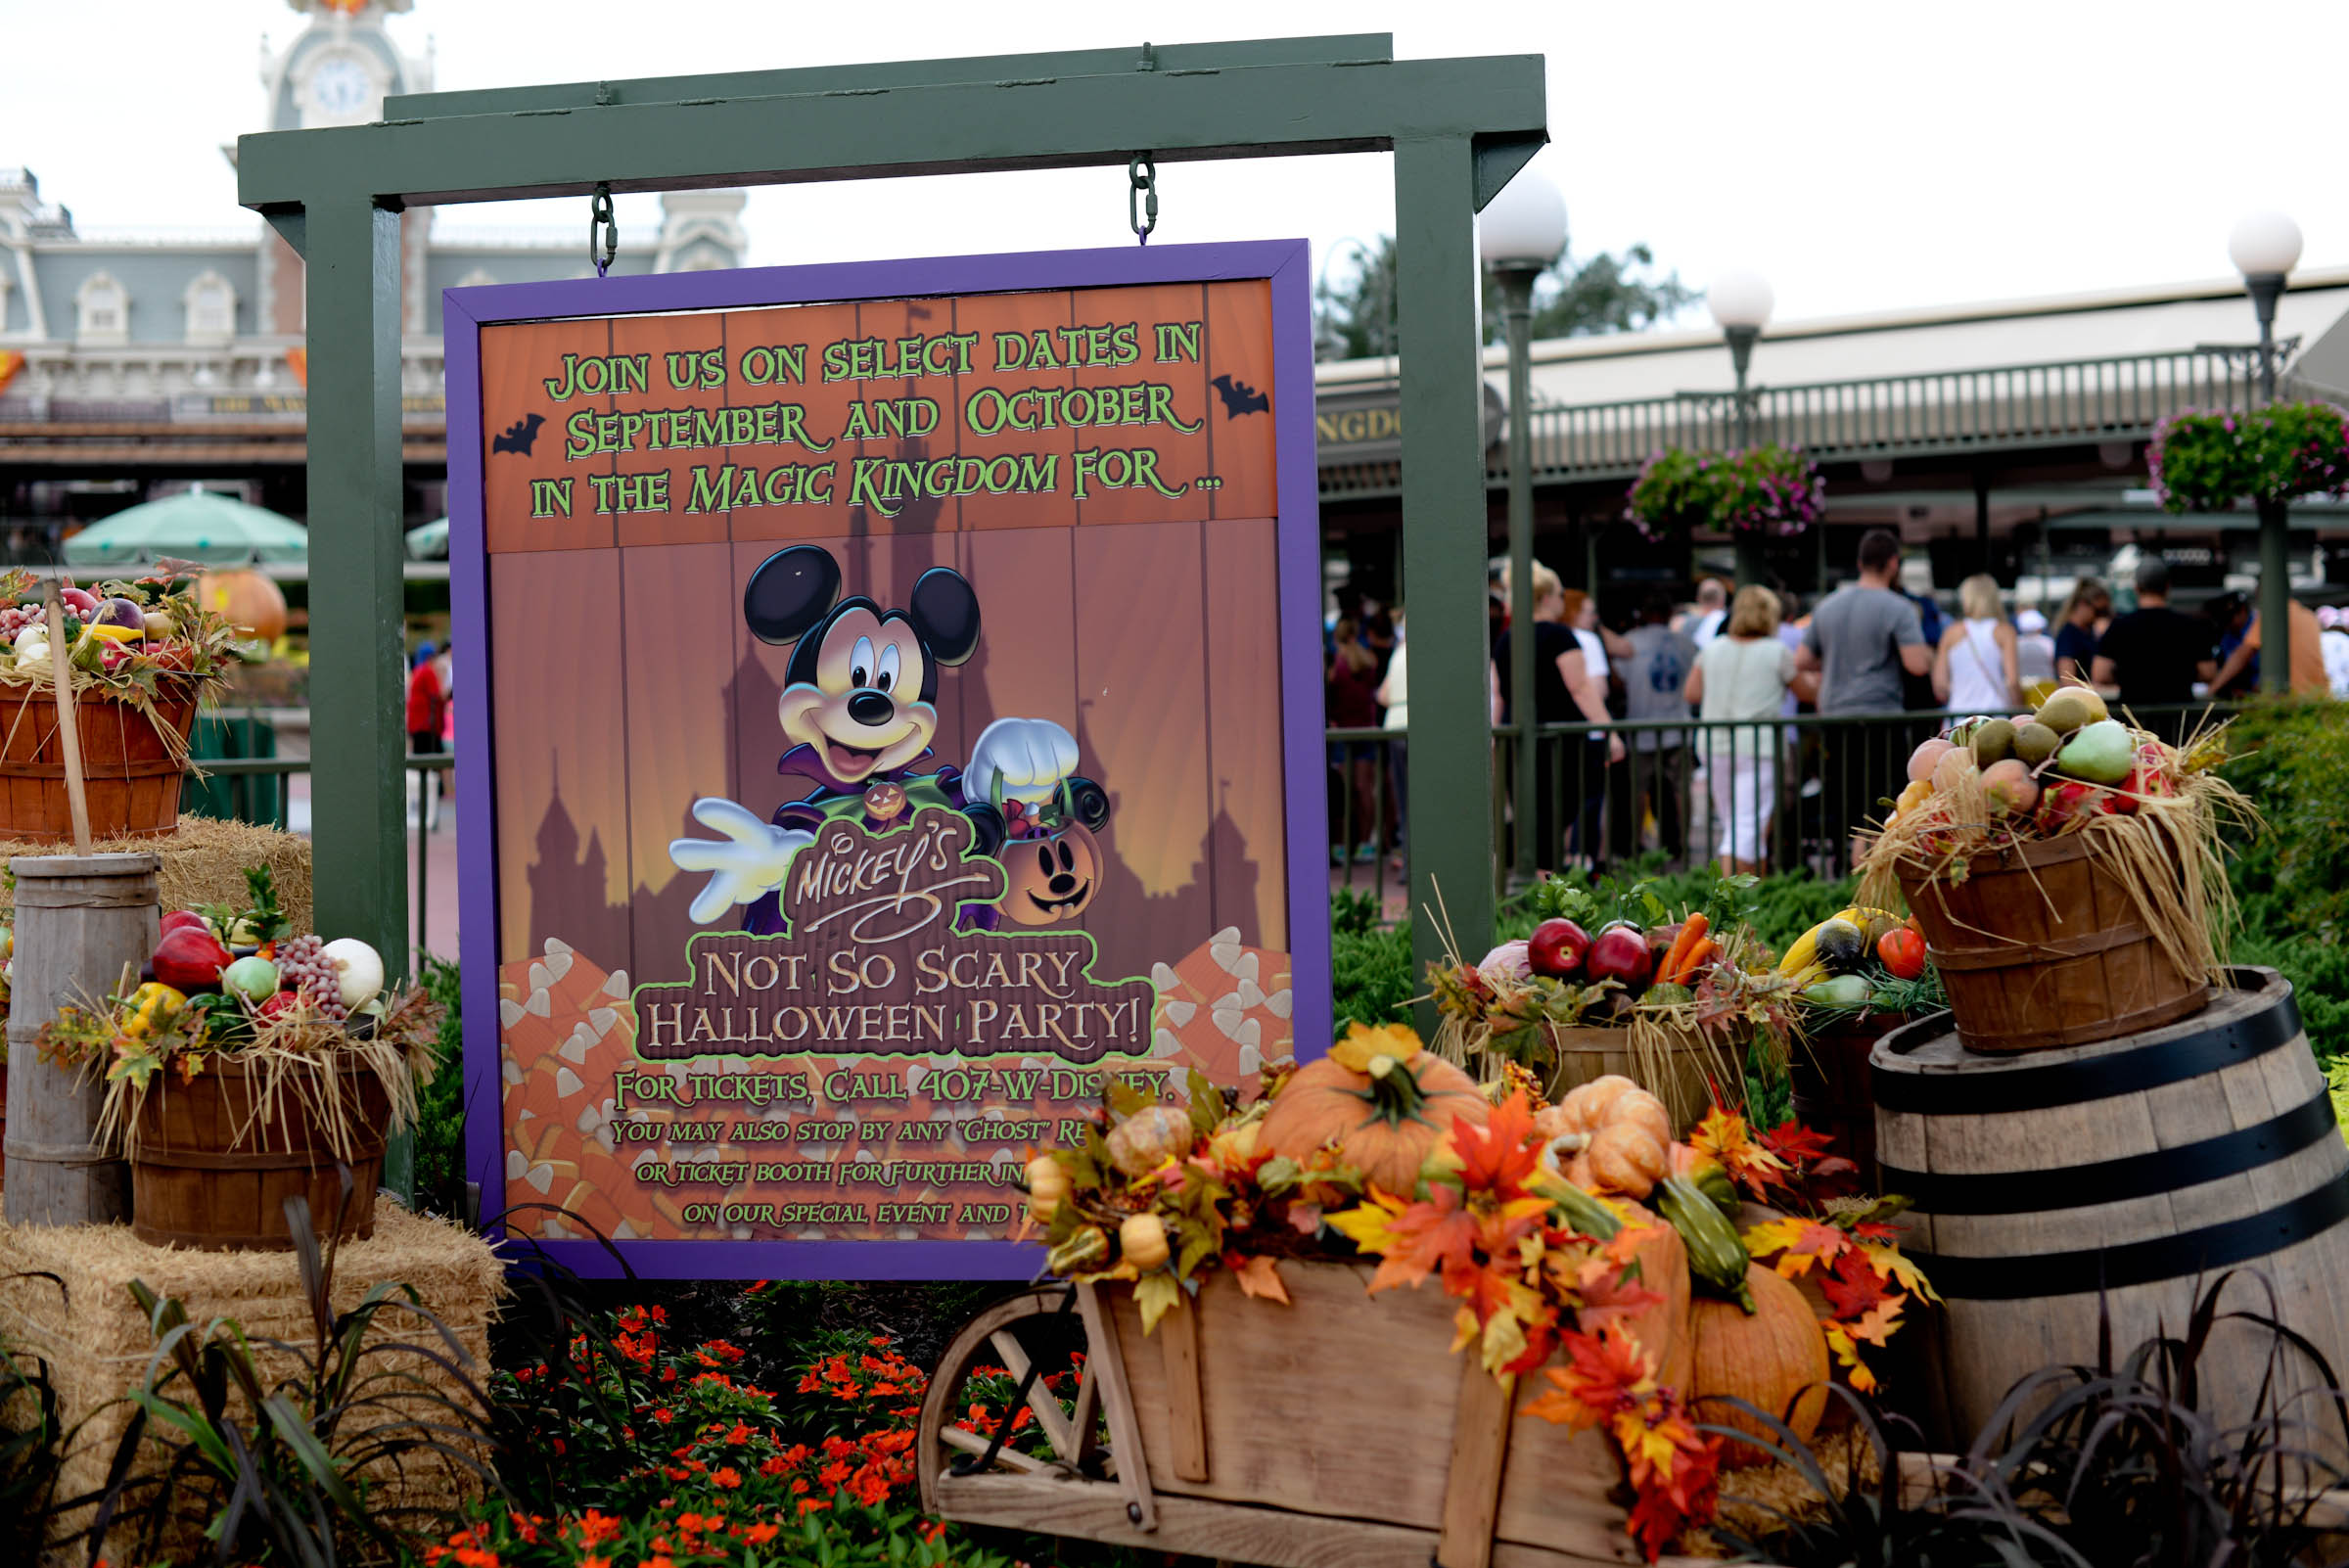 Mickey’s Not So Scary Halloween Party Cancelled for Tonight